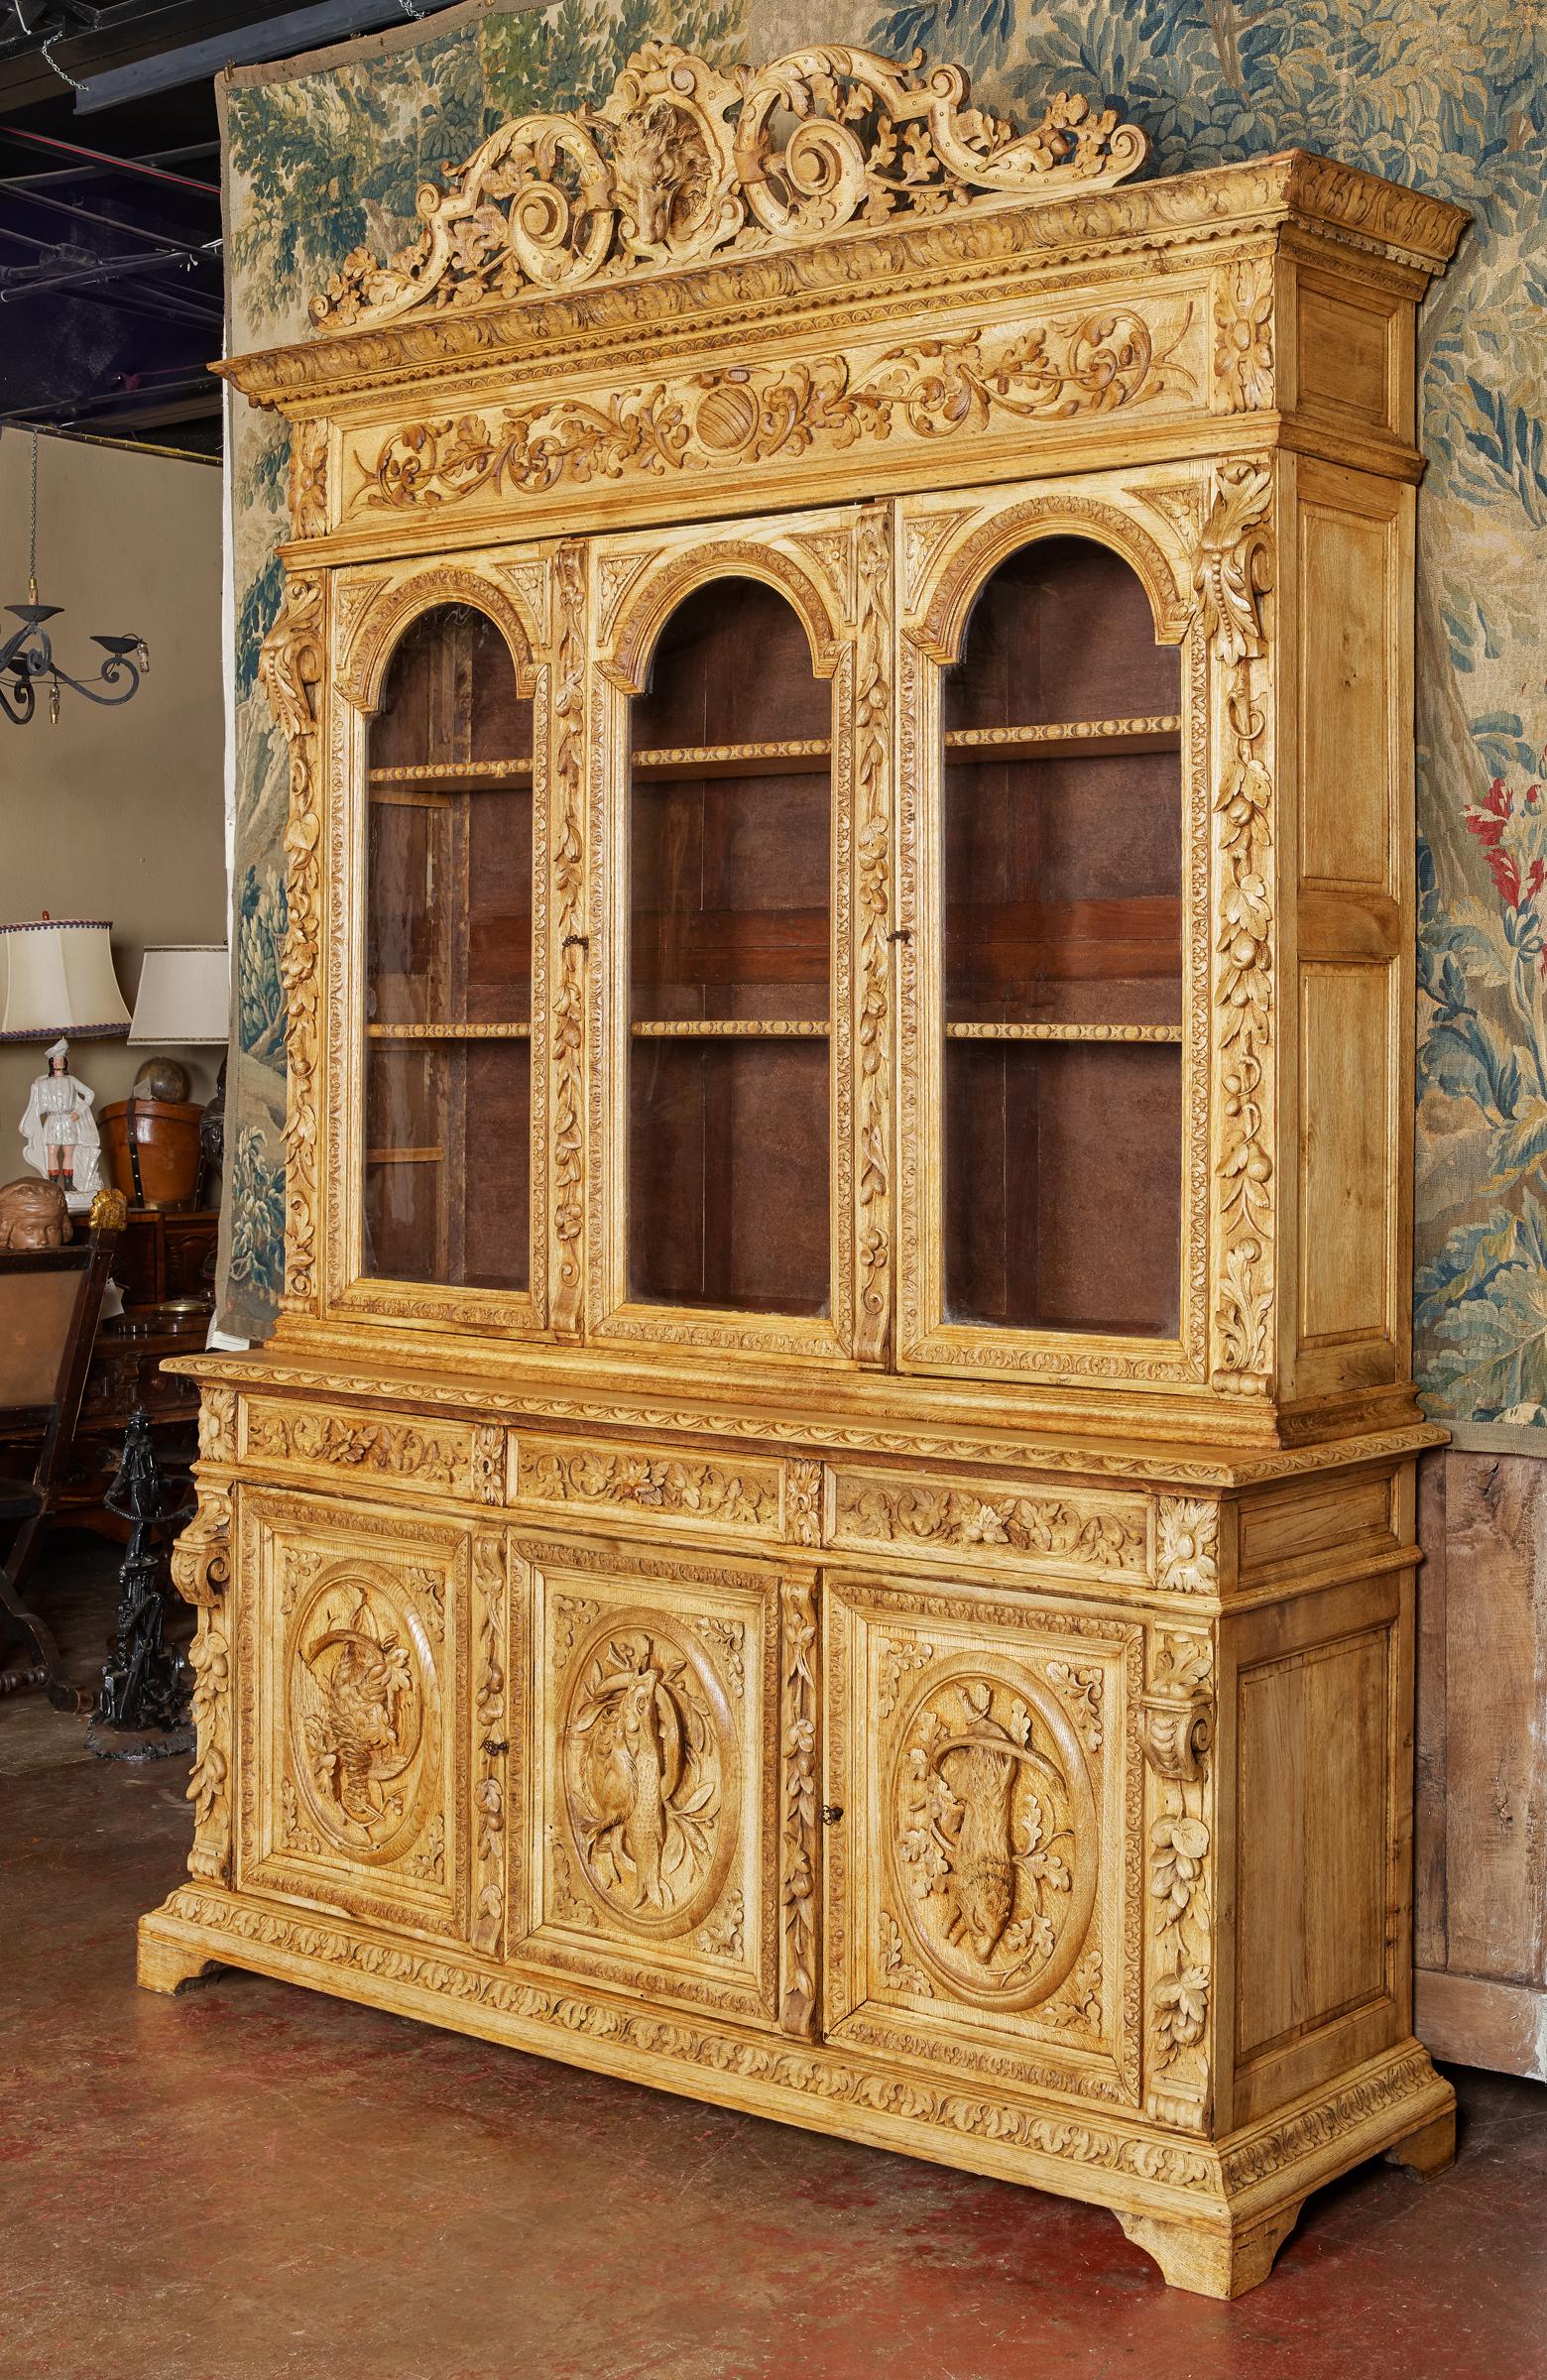 This spectacular antique hunt cabinet was crafted in northern France circa 1870. The large bookcase built in two sections, stands on a molded base further raised on bracket feet, and features exquisite carvings starting at the pediment with a